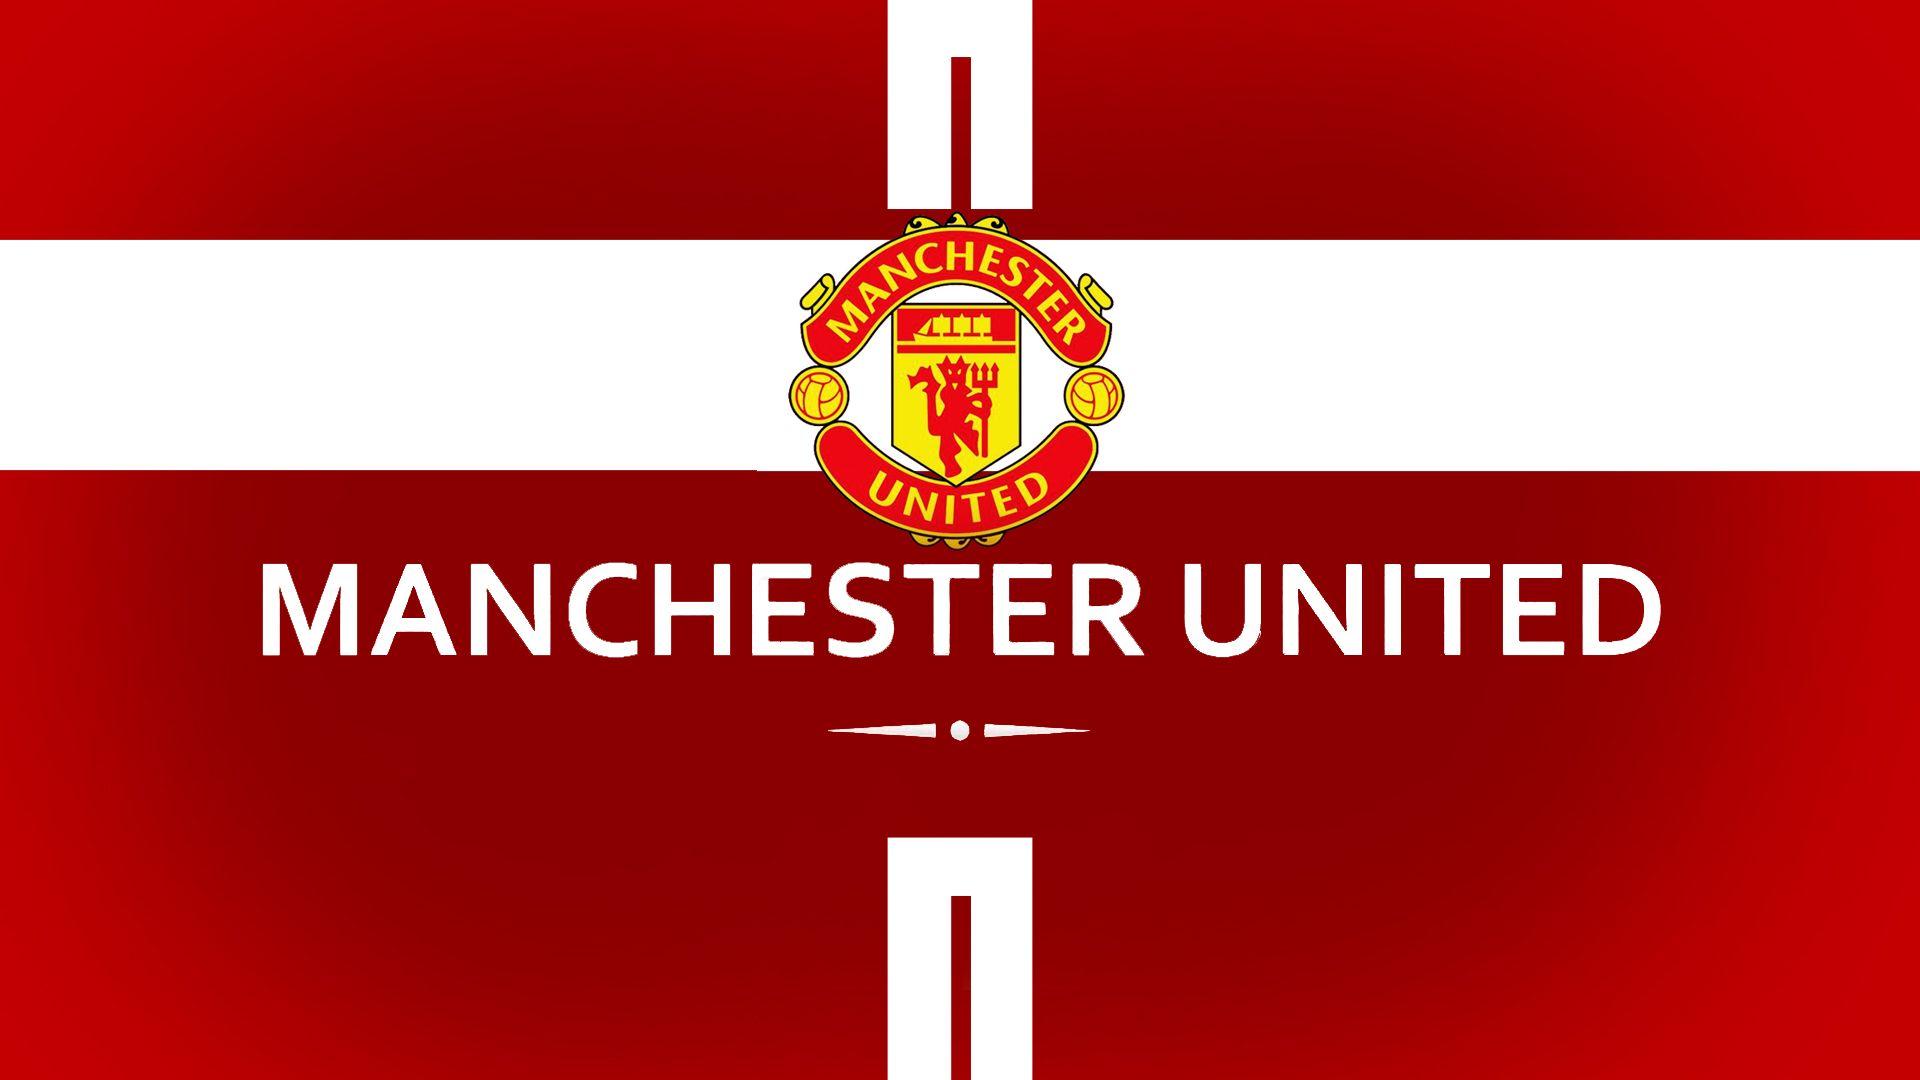 Manchester United GameWallpic.us. High Definition Wallpaper